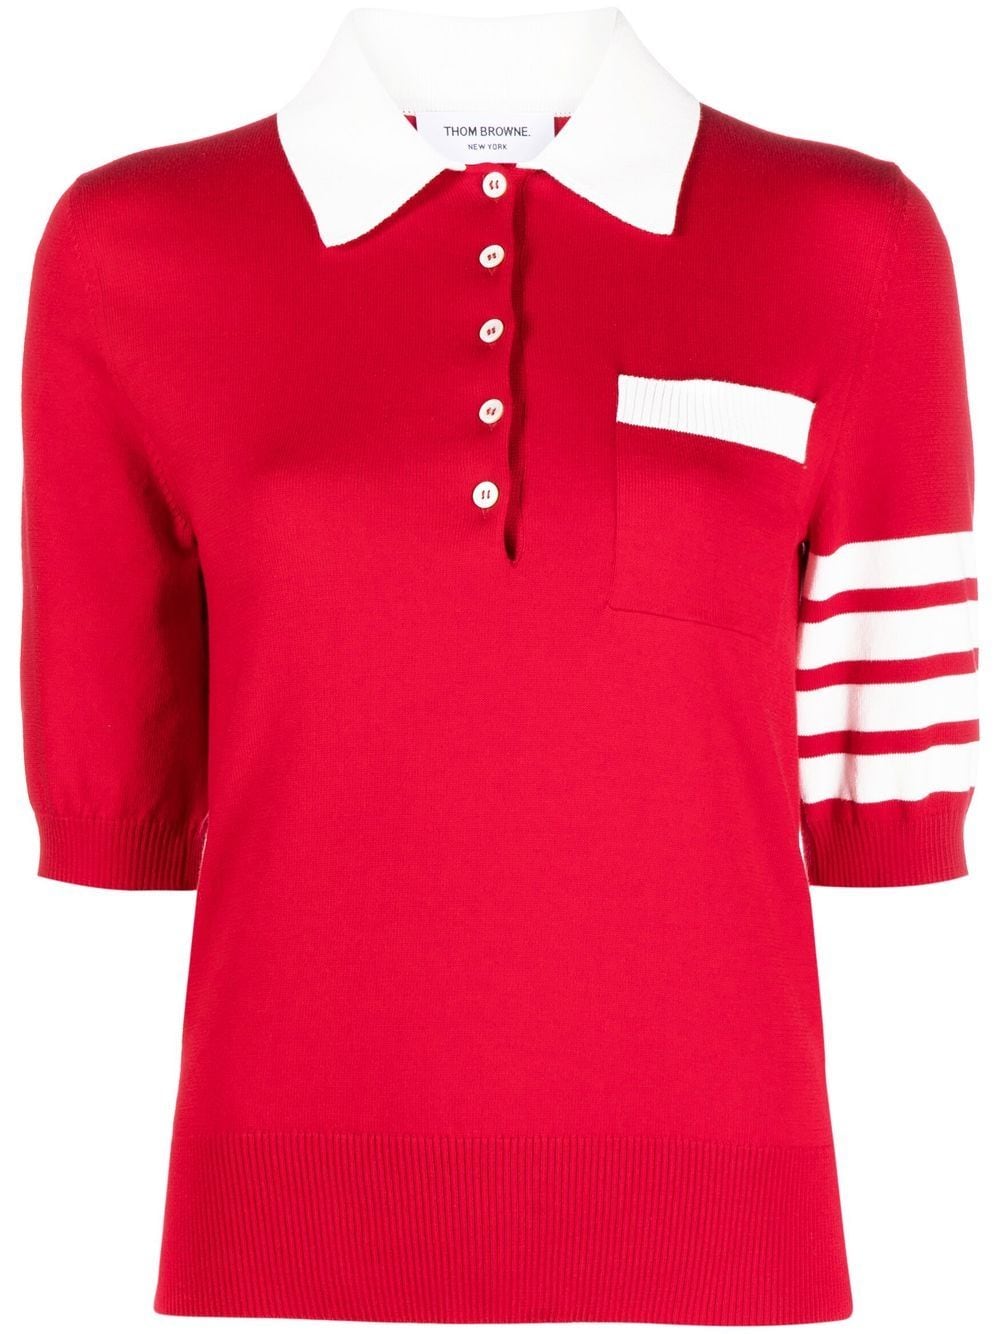 Thom Browne Hector Intarsia Polo Shirt In Red